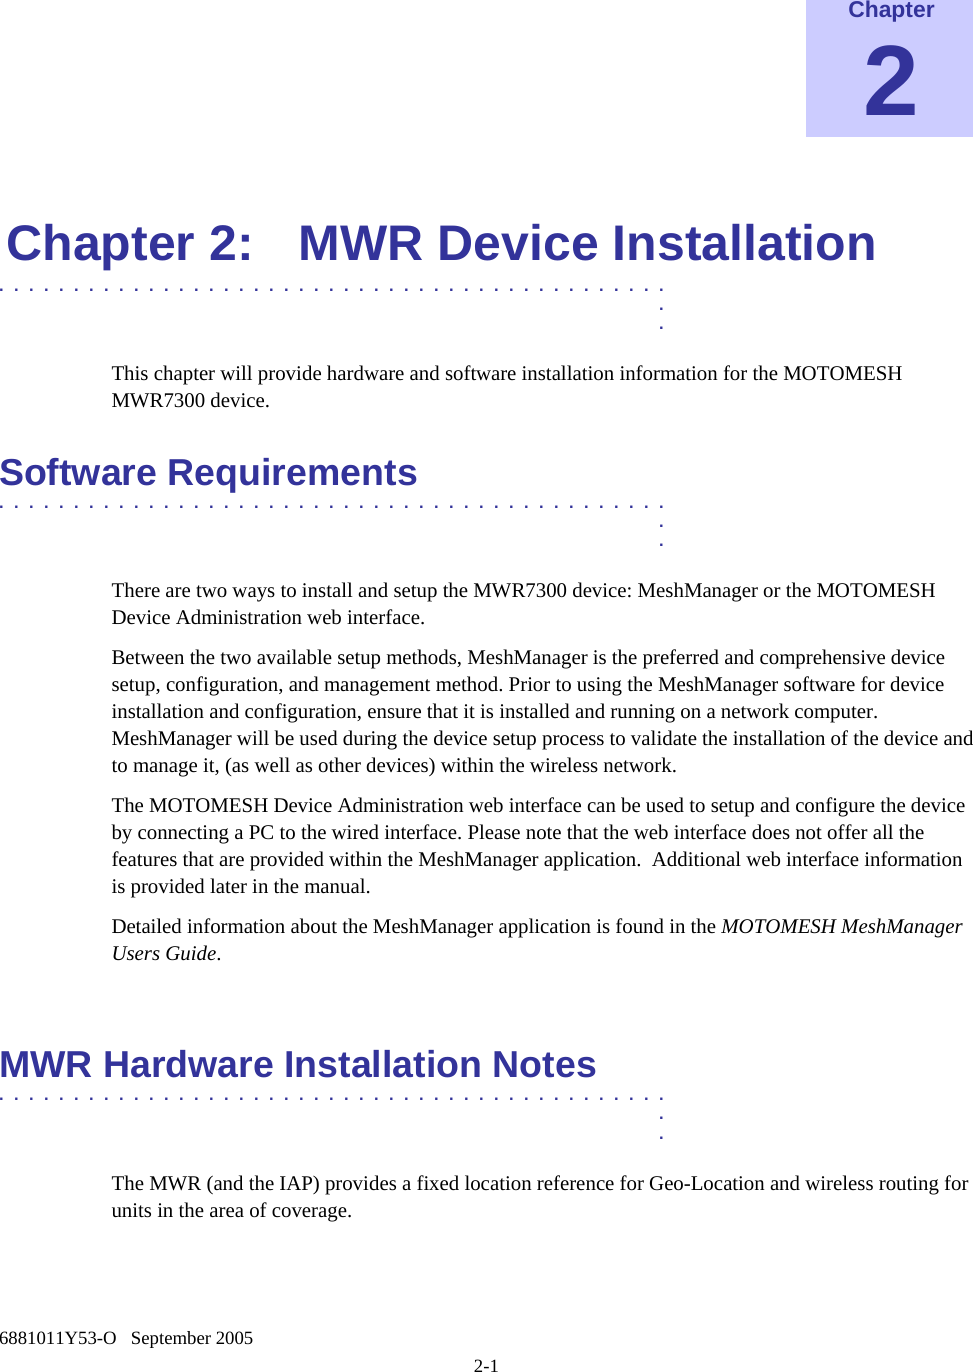    6881011Y53-O   September 2005 2-1  Chapter 2  Chapter 2:  MWR Device Installation .............................................  .  . This chapter will provide hardware and software installation information for the MOTOMESH MWR7300 device. Software Requirements .............................................  .  . There are two ways to install and setup the MWR7300 device: MeshManager or the MOTOMESH Device Administration web interface. Between the two available setup methods, MeshManager is the preferred and comprehensive device setup, configuration, and management method. Prior to using the MeshManager software for device installation and configuration, ensure that it is installed and running on a network computer.  MeshManager will be used during the device setup process to validate the installation of the device and to manage it, (as well as other devices) within the wireless network. The MOTOMESH Device Administration web interface can be used to setup and configure the device by connecting a PC to the wired interface. Please note that the web interface does not offer all the features that are provided within the MeshManager application.  Additional web interface information is provided later in the manual. Detailed information about the MeshManager application is found in the MOTOMESH MeshManager Users Guide.  MWR Hardware Installation Notes .............................................  .  . The MWR (and the IAP) provides a fixed location reference for Geo-Location and wireless routing for units in the area of coverage. 